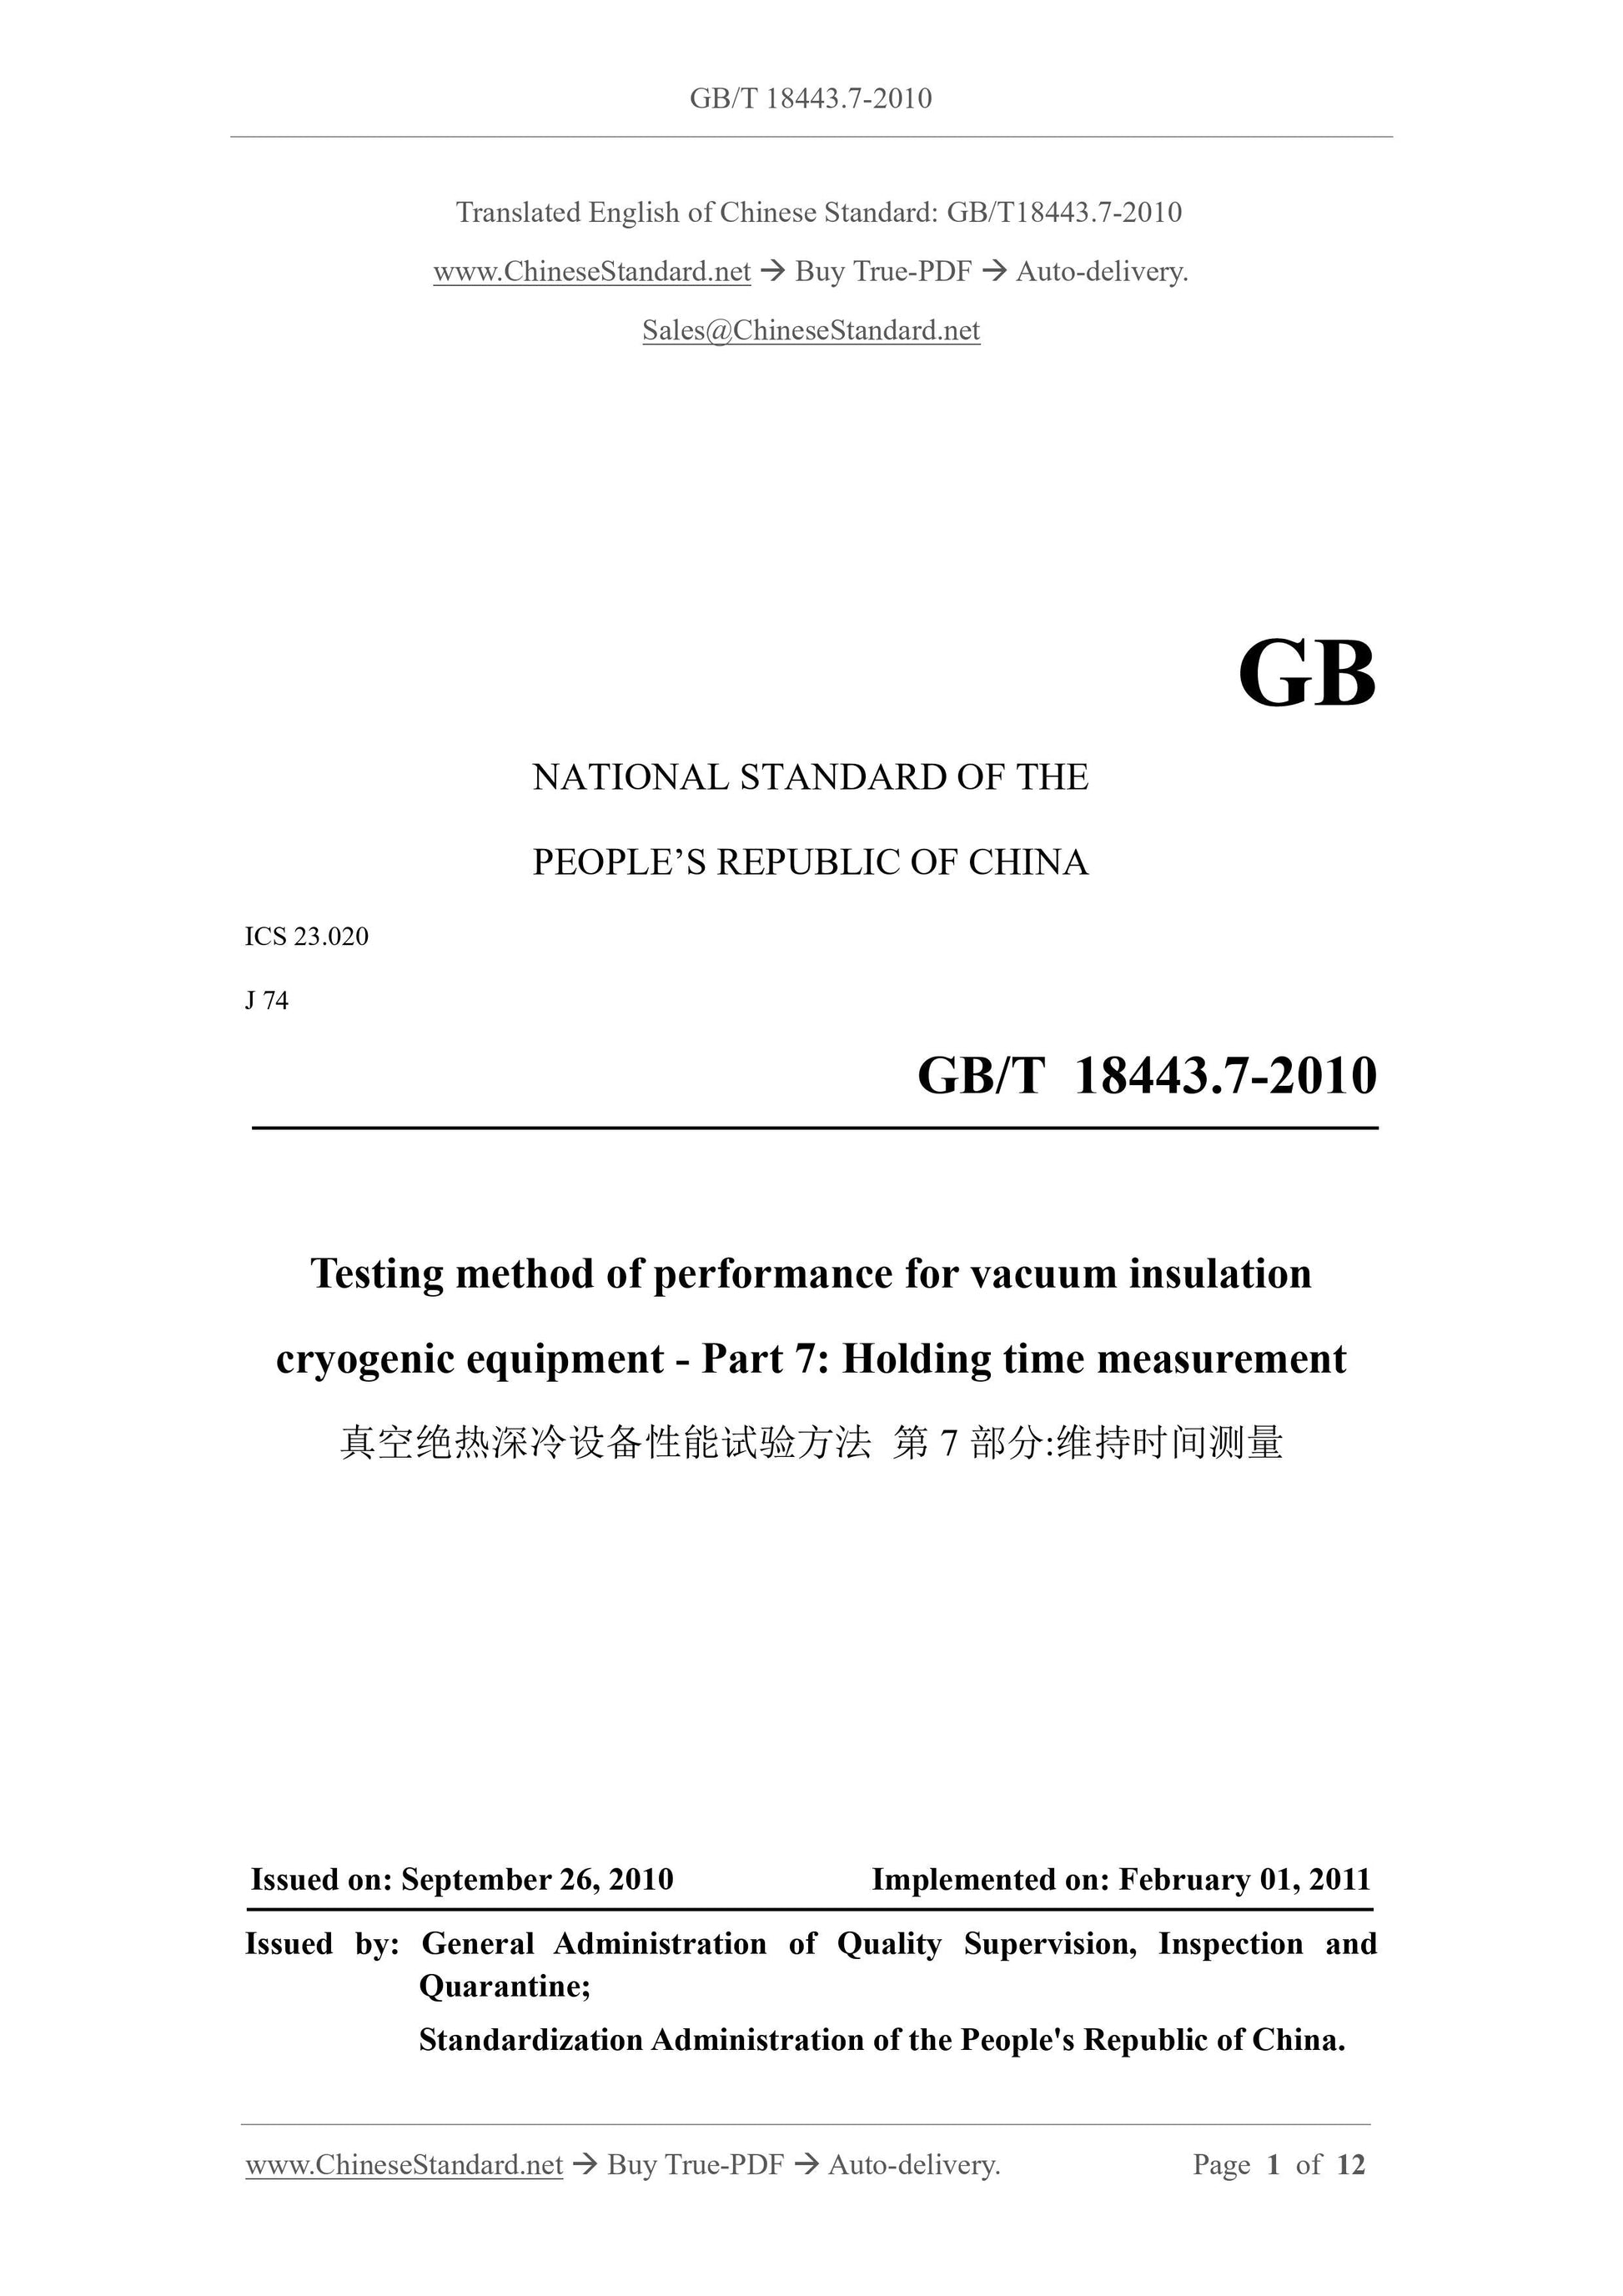 GB/T 18443.7-2010 Page 1